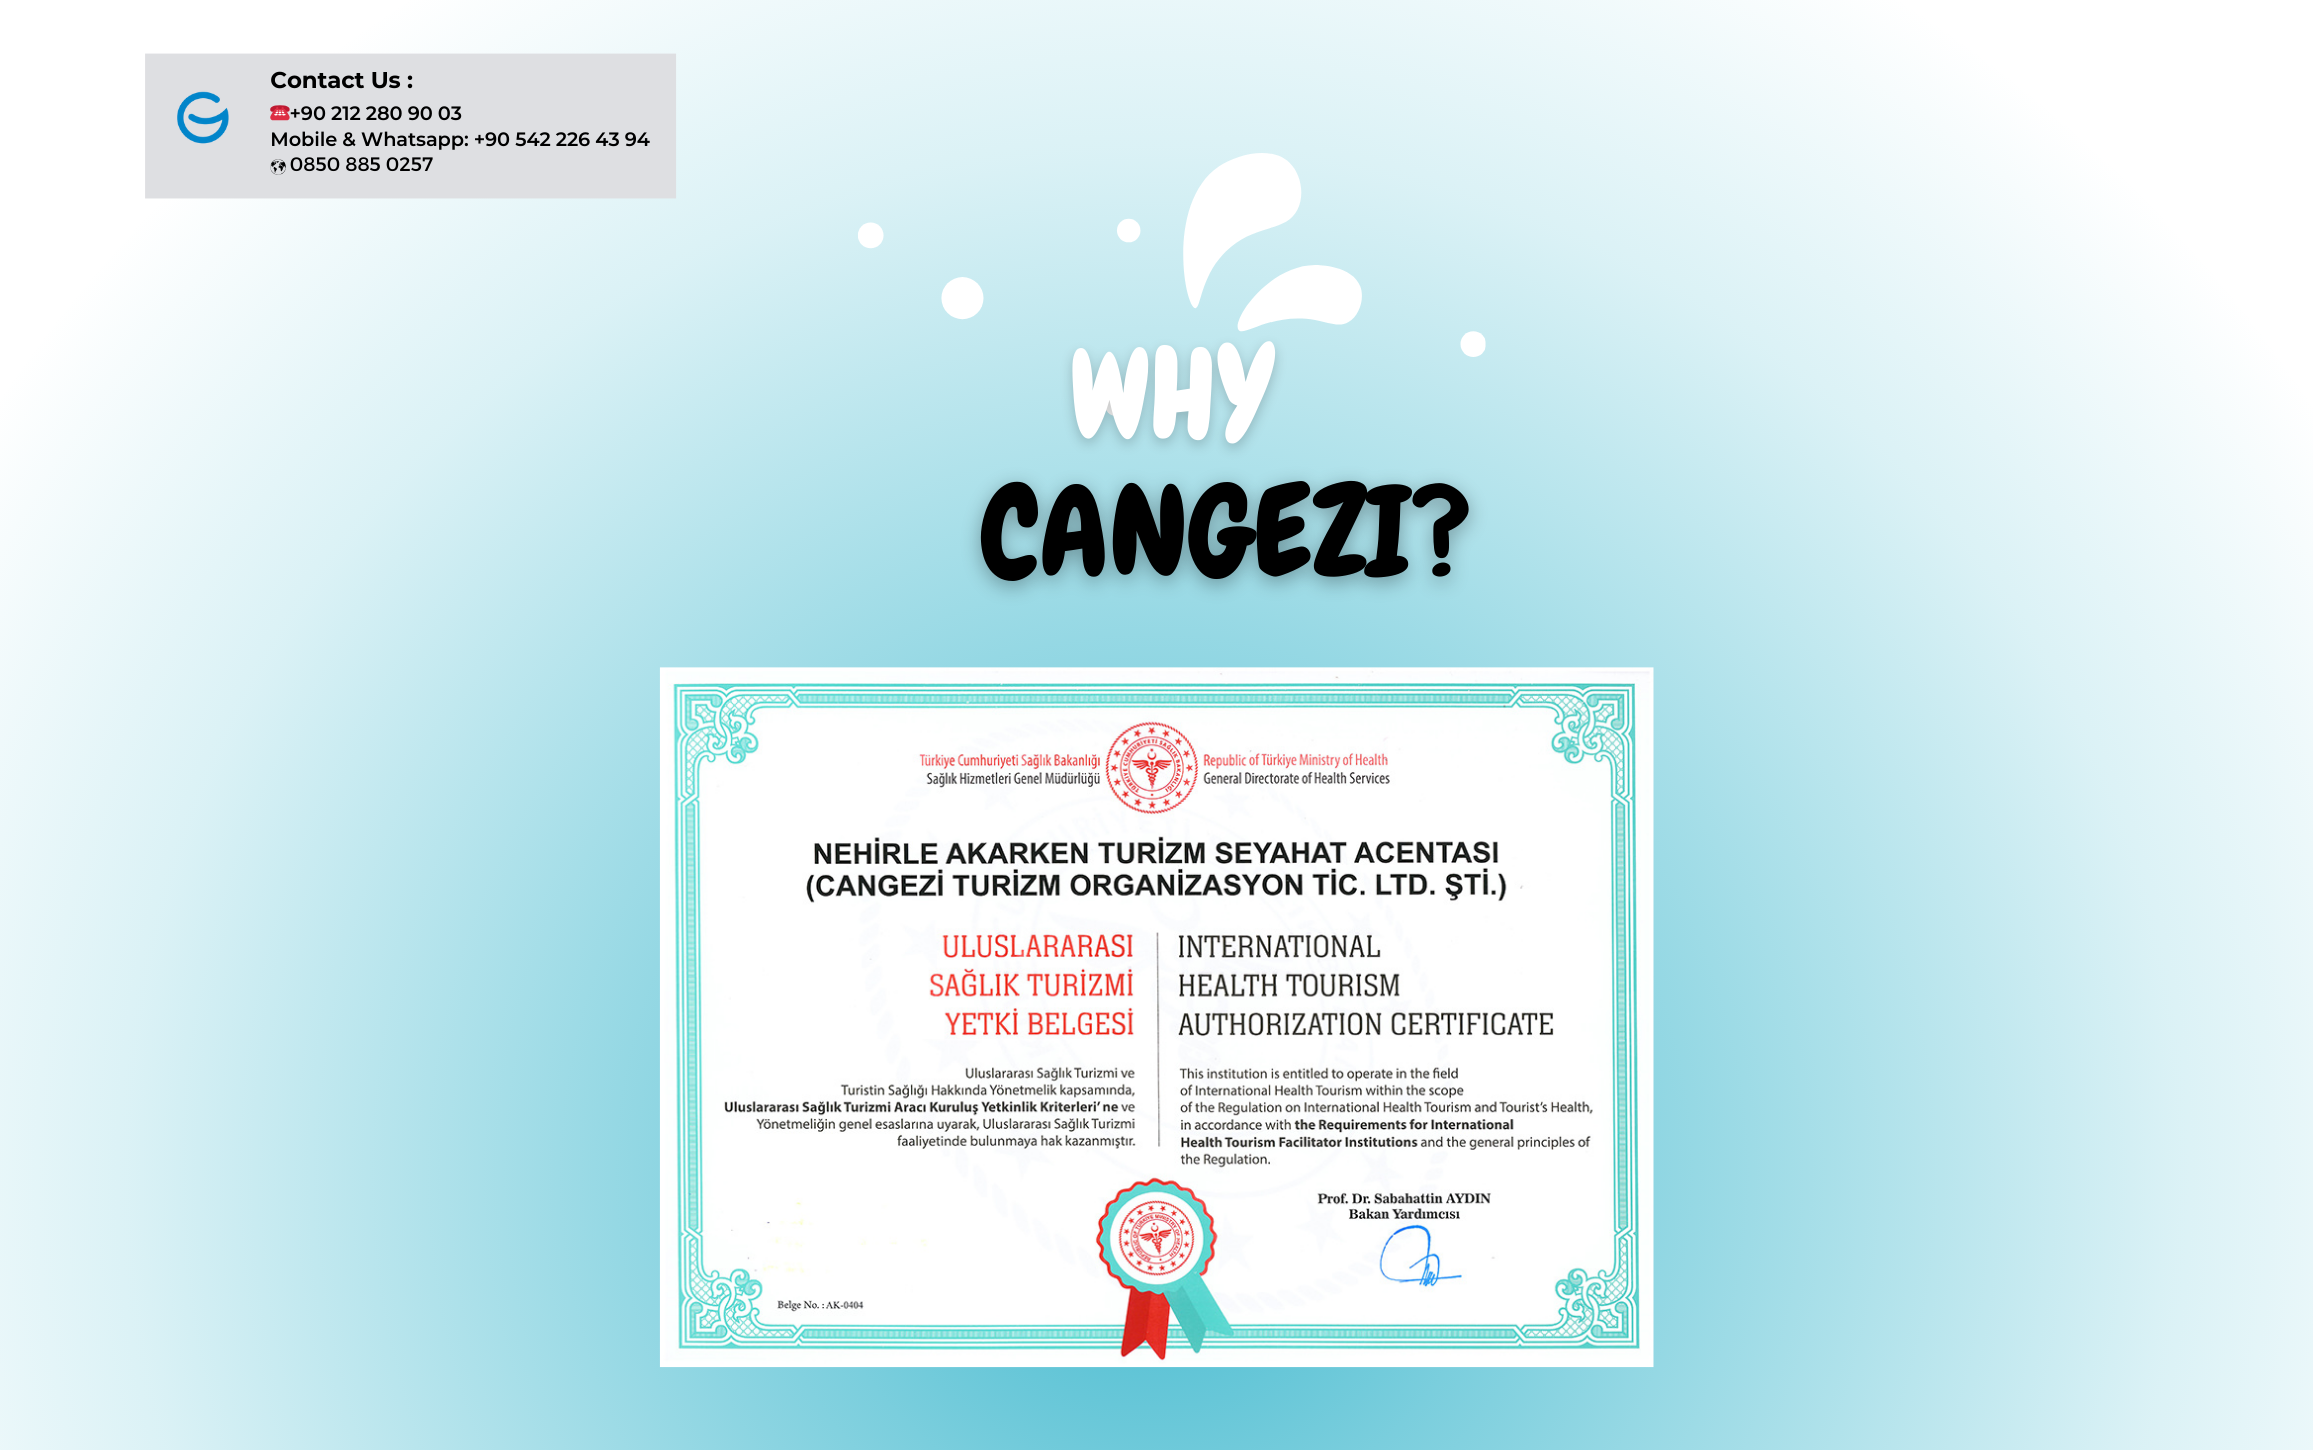 Why Cangezi for Health Tourism?